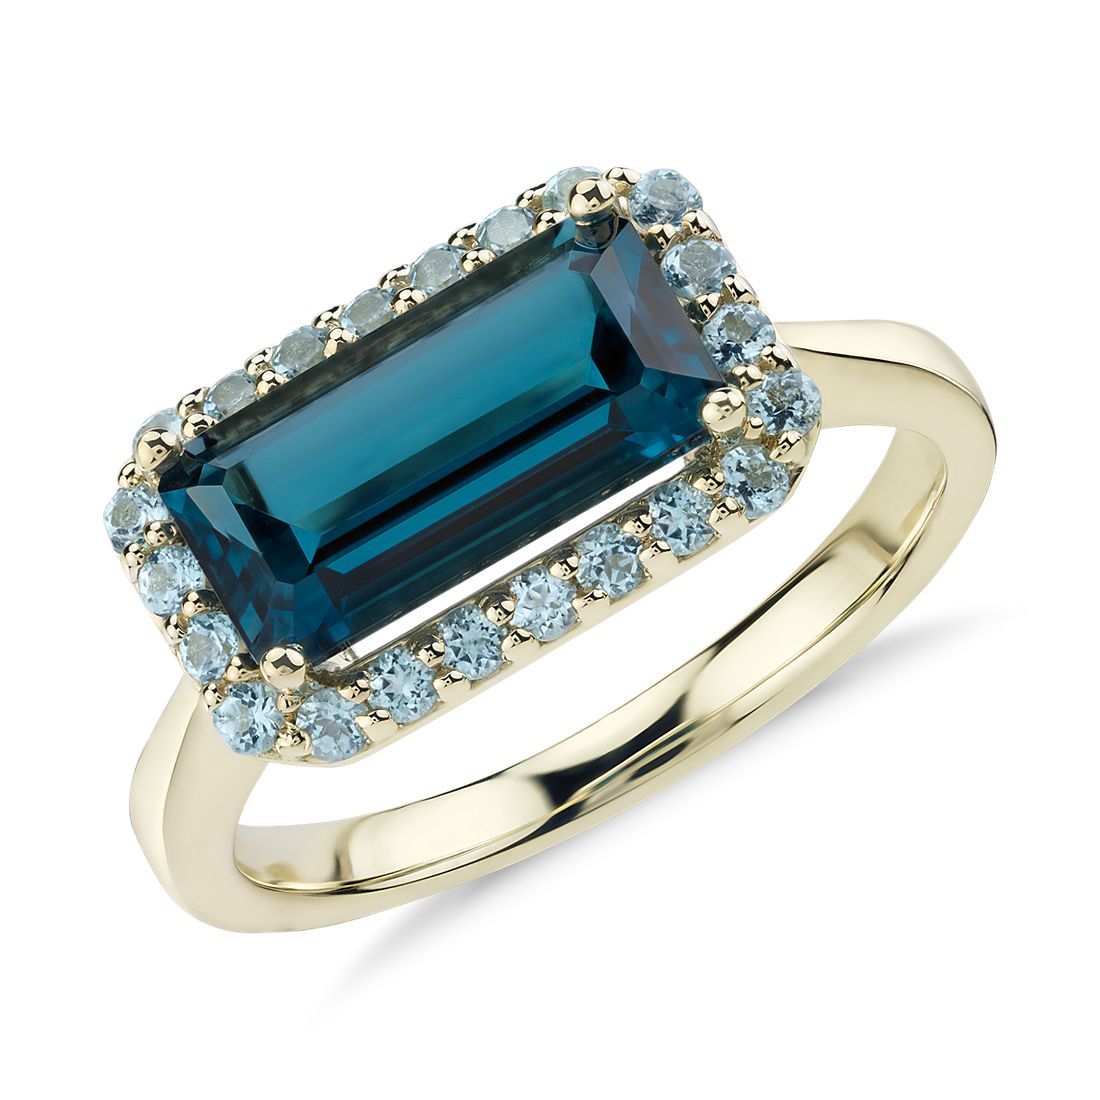 Robert Leser East-West London Blue Topaz Halo Ring in 14k Yellow Gold (11x5.5mm) | Blue Nile | Blue Nile Asia